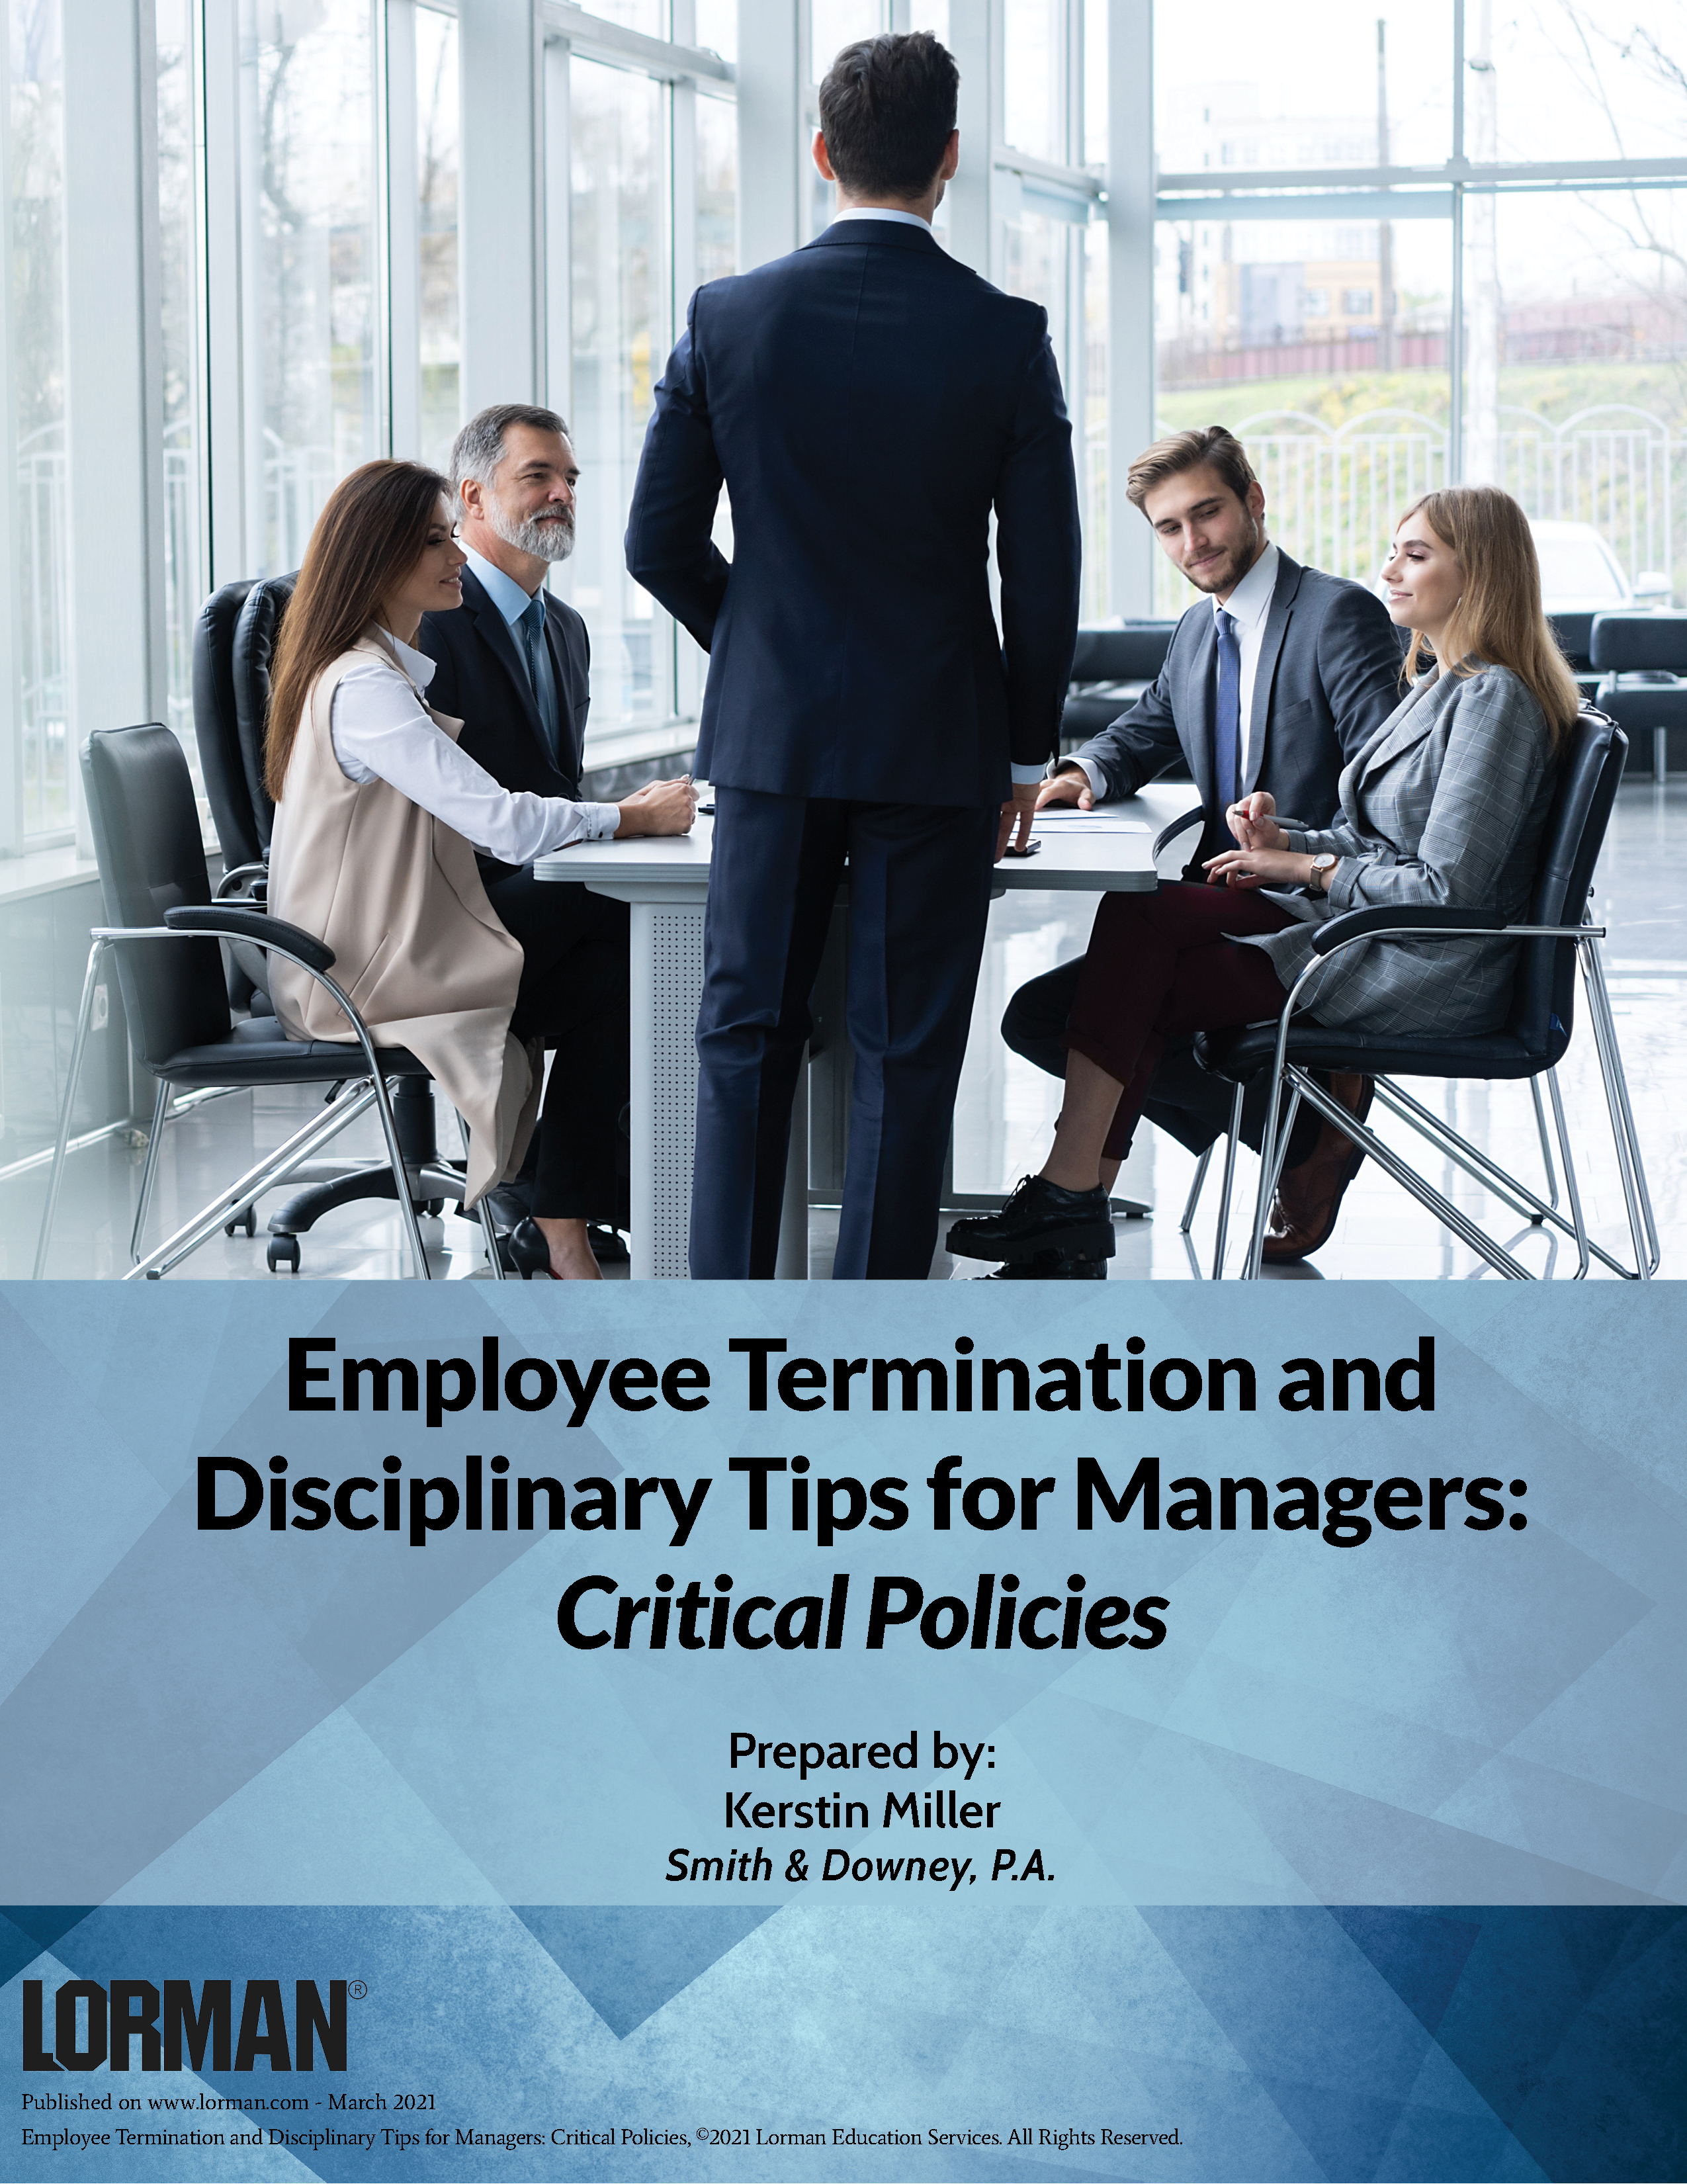 Employee Termination and Disciplinary Tips for Managers: Critical Policies